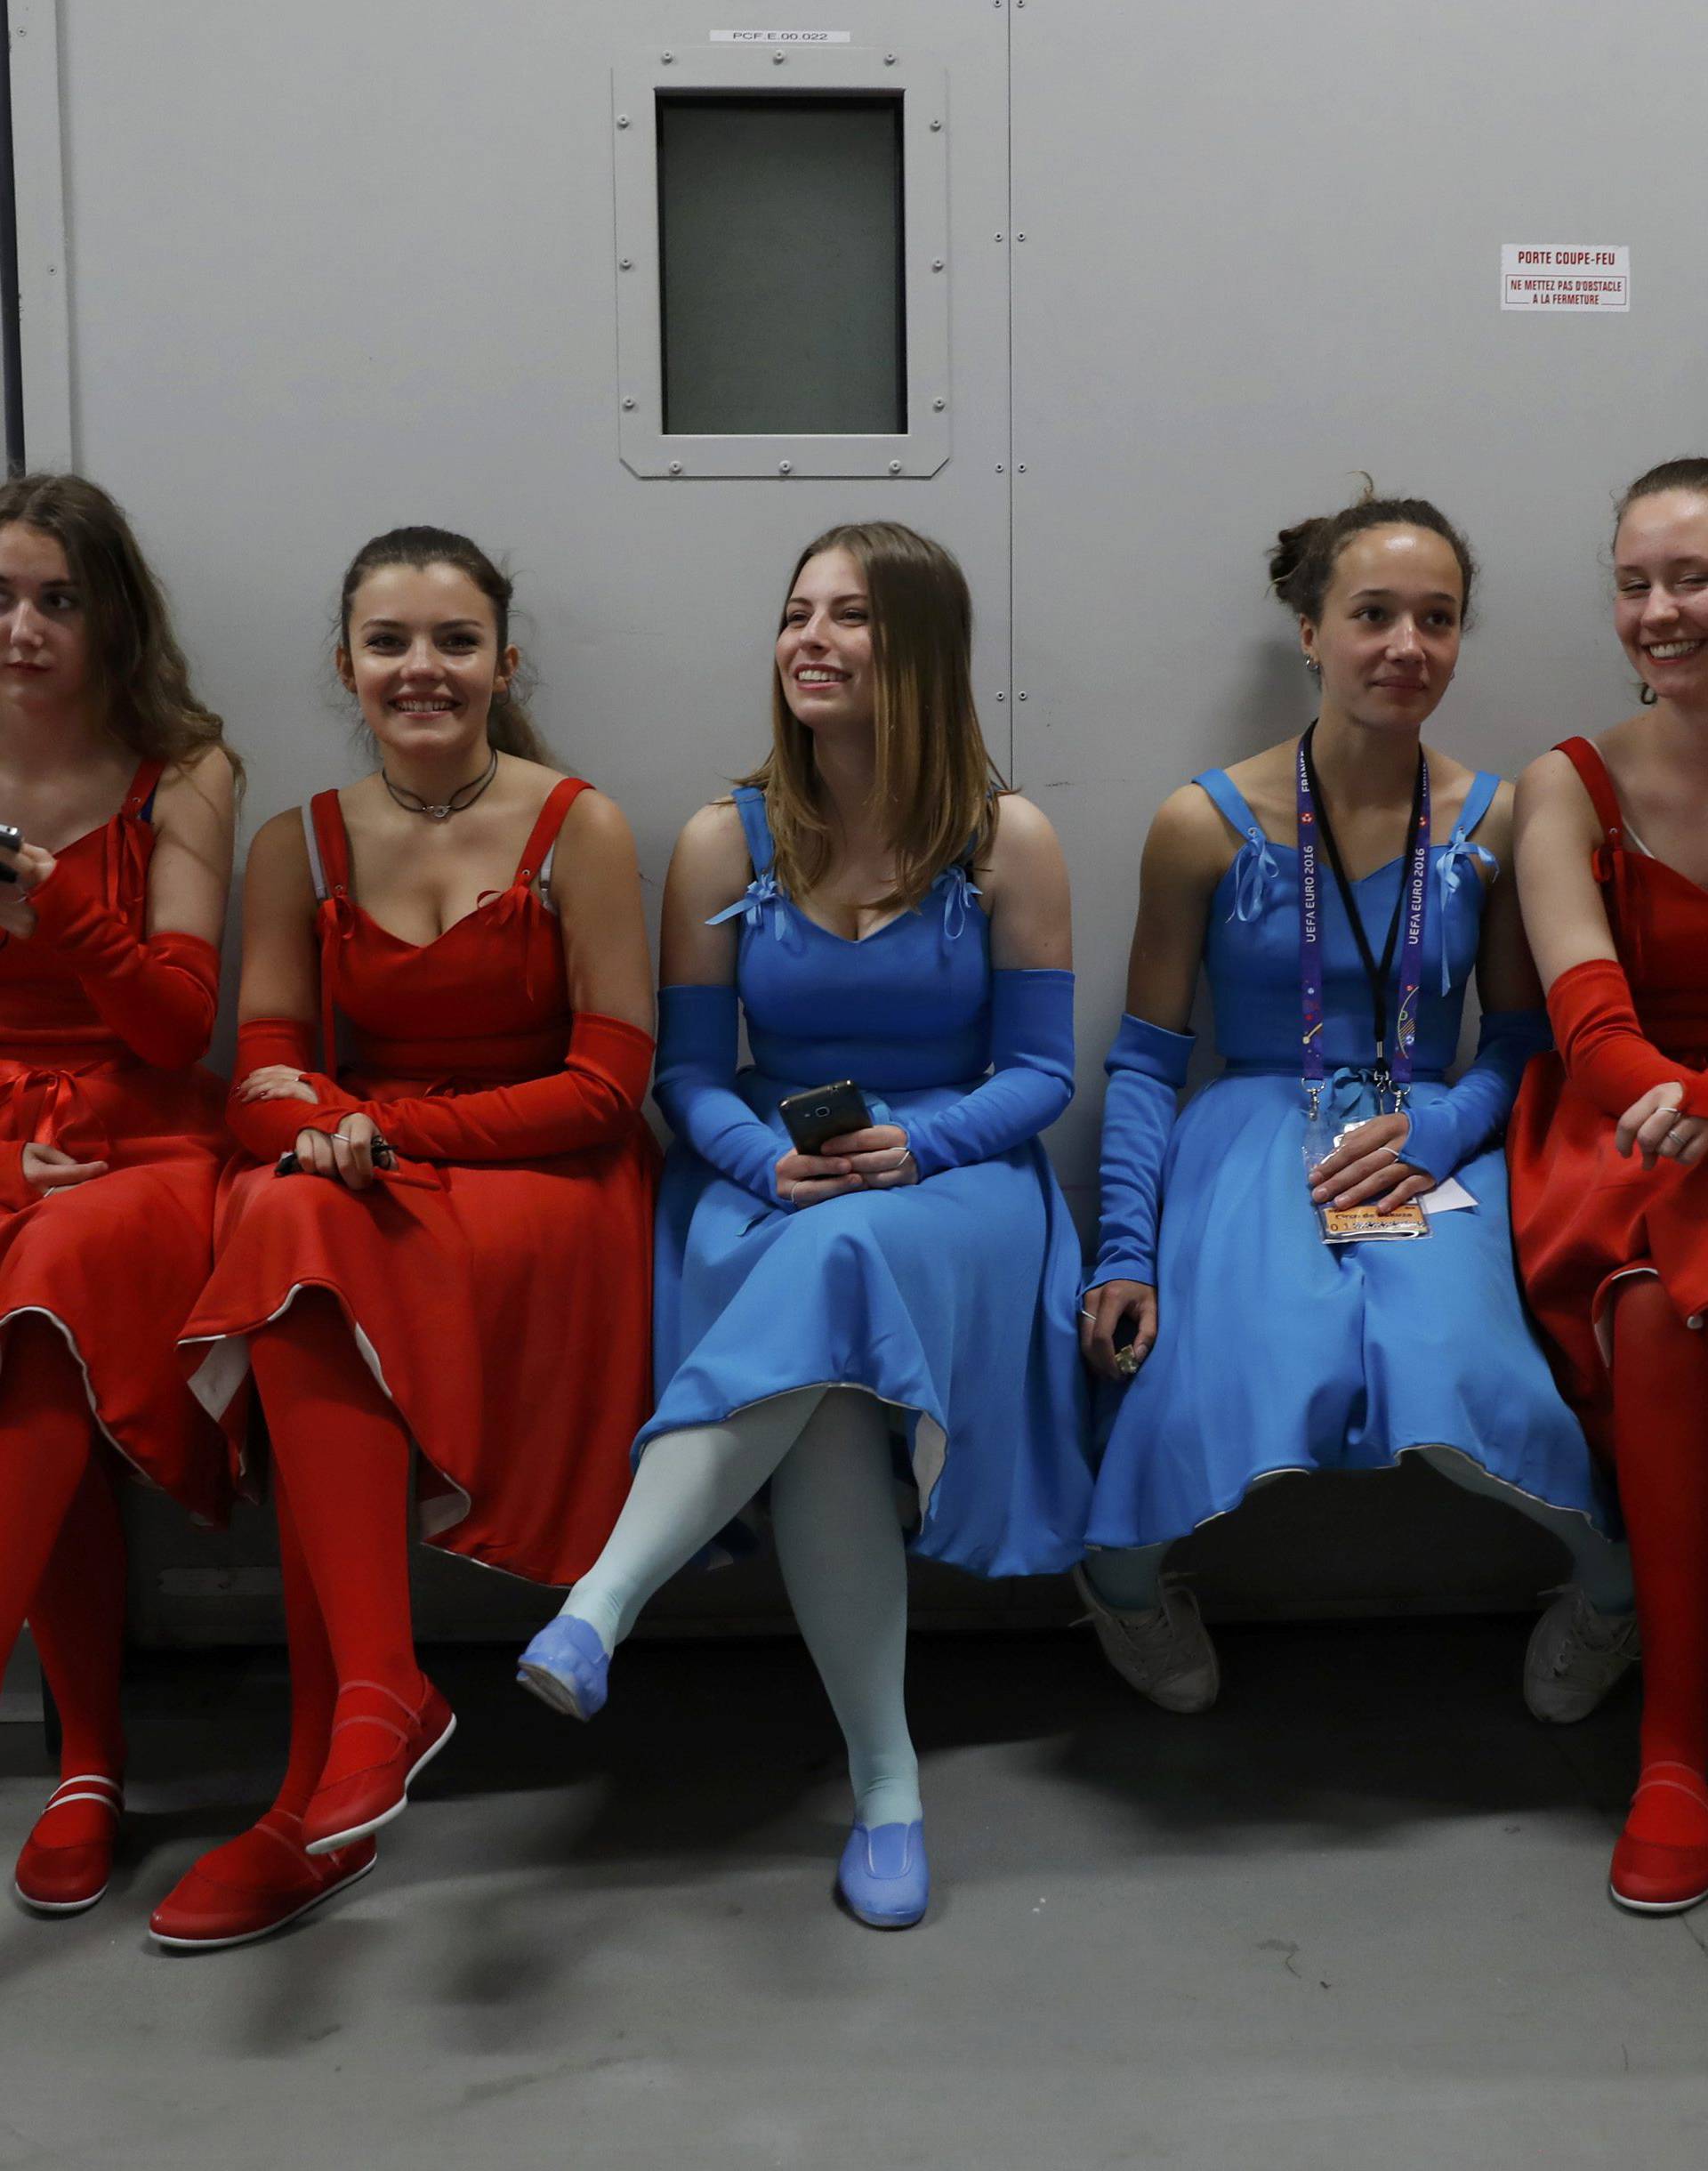 Dancers sit backstage before rehearsal for opening show of the UEFA 2016 European Championship in Paris